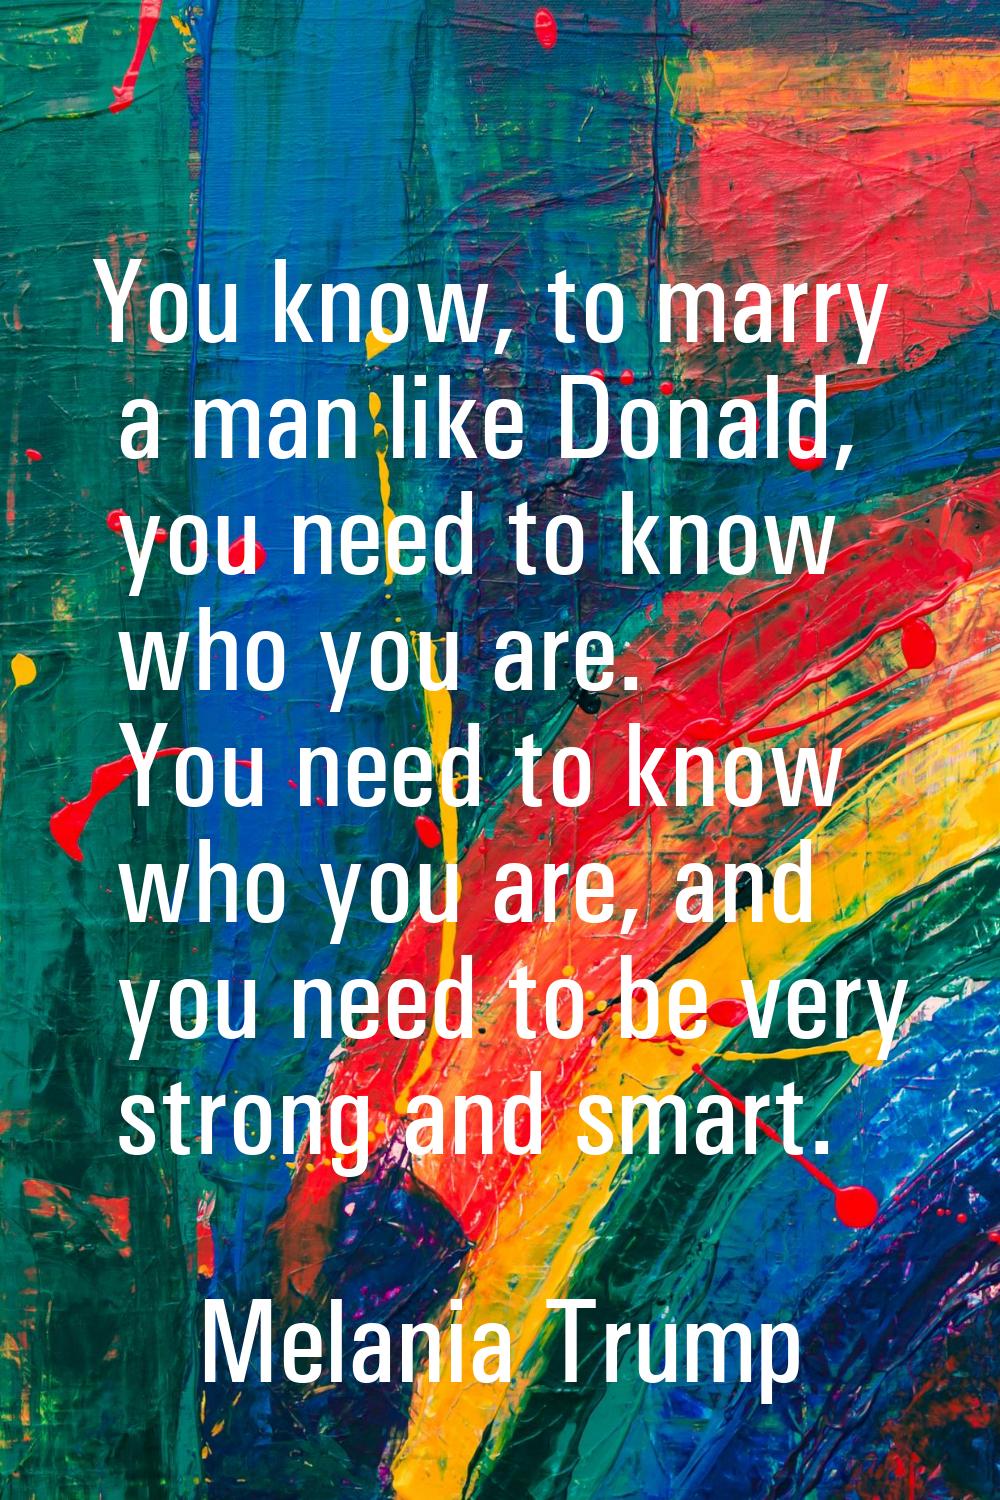 You know, to marry a man like Donald, you need to know who you are. You need to know who you are, a